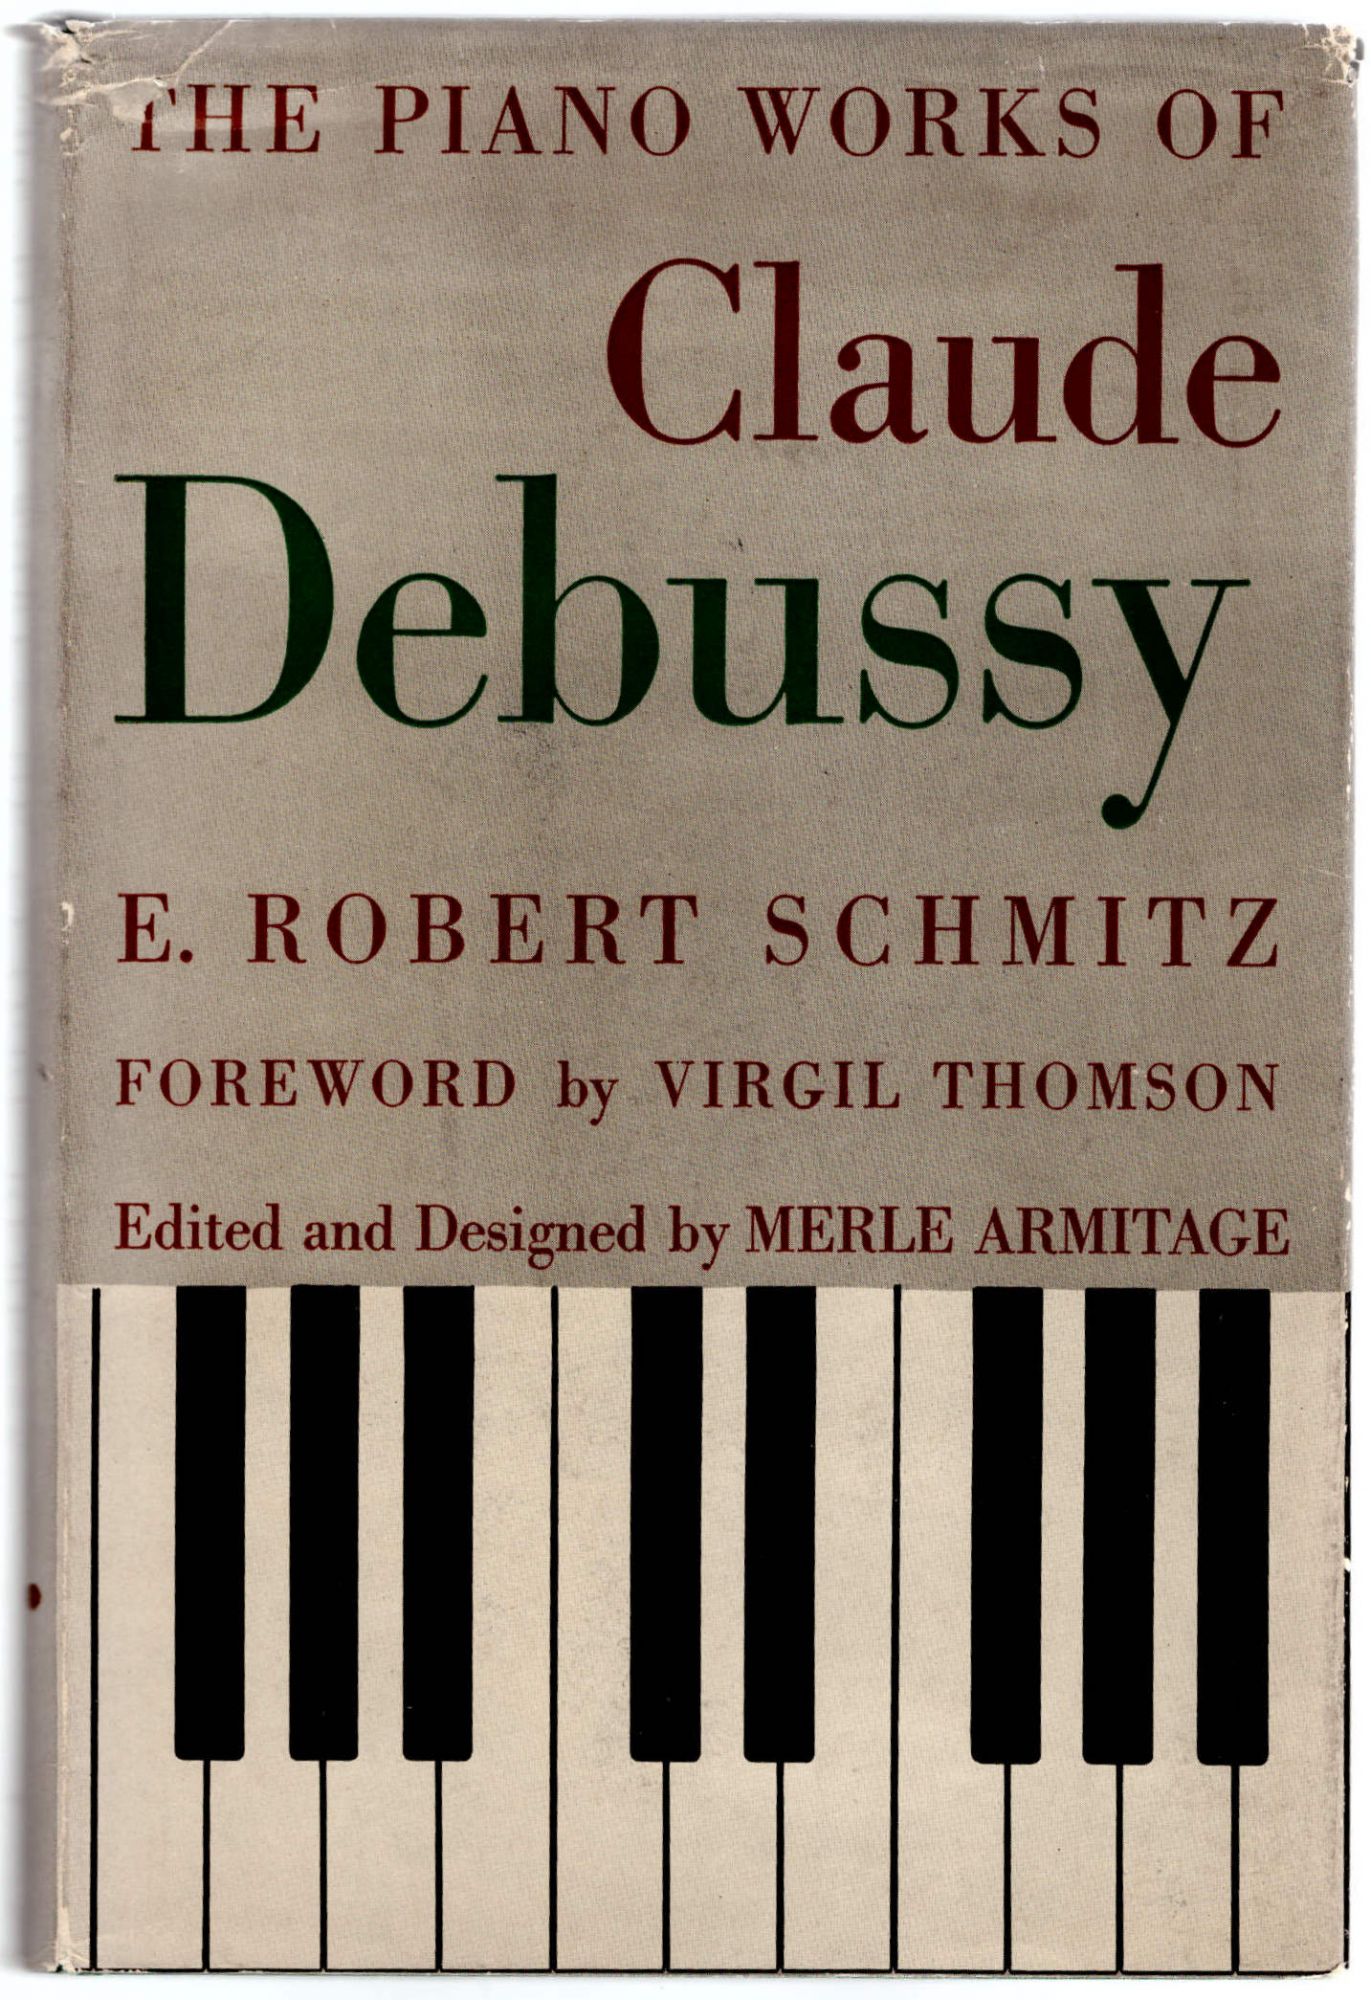 Claude　Foreword　The　of　Piano　Robert　E.　Works　Merle　Debussy　Schmitz,　Armitage,　Virgil　Thomson,　First　Edition